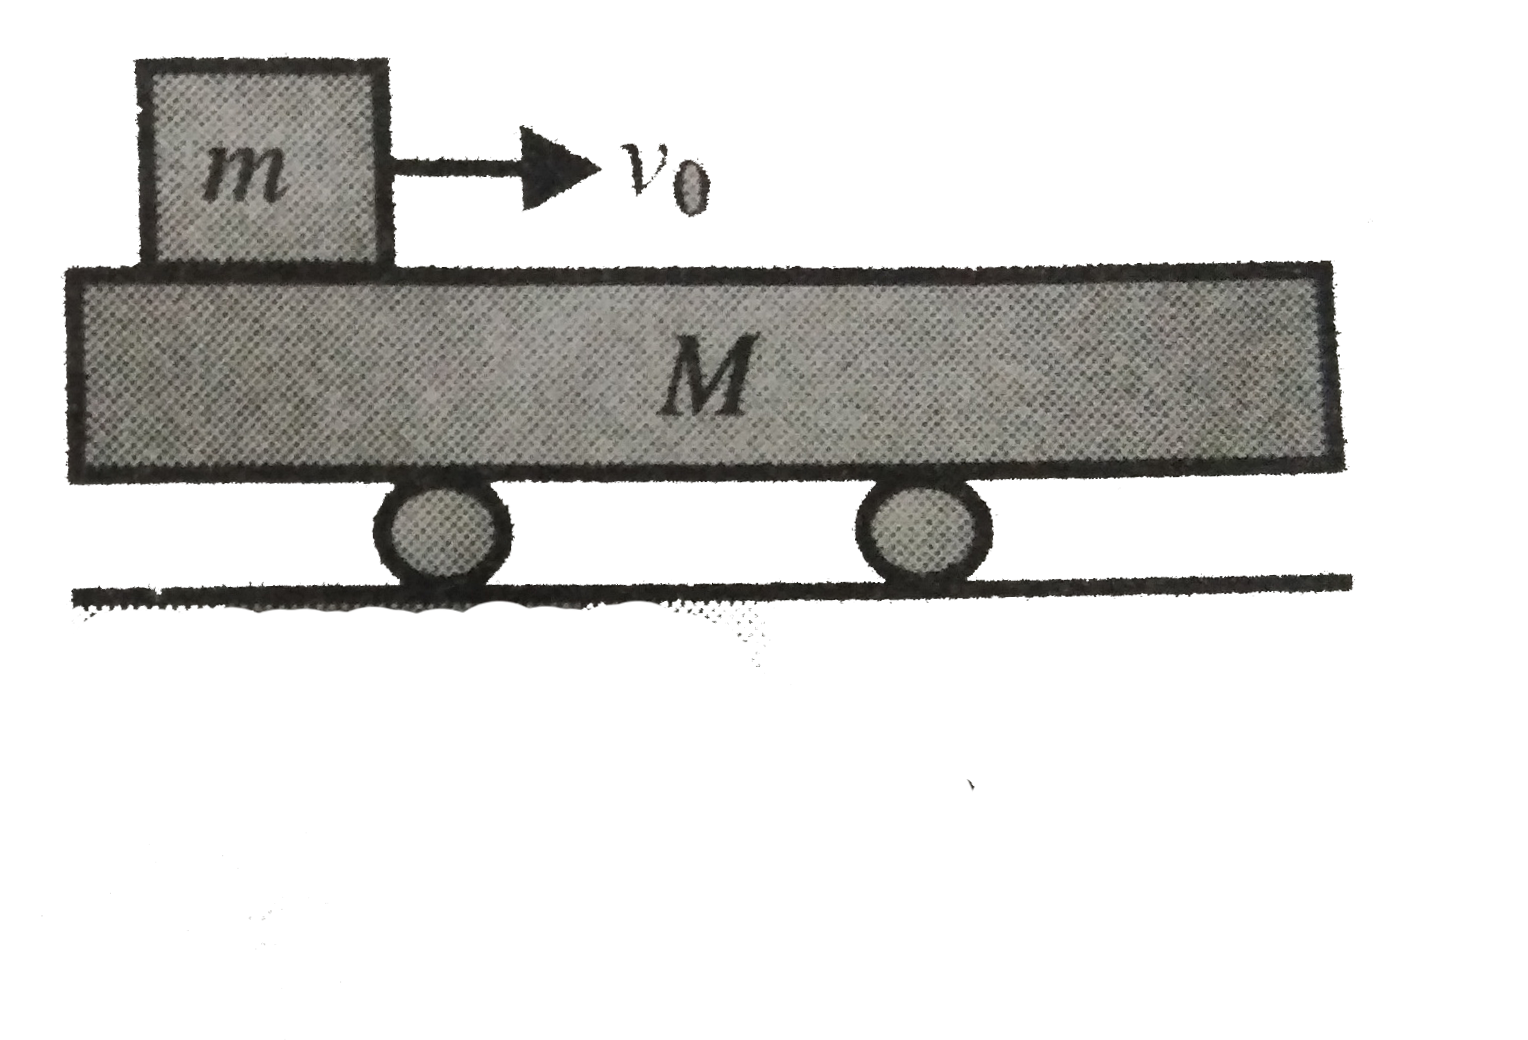 A block of mass m is pushed with a velocity v(0) along the surface of a trolley car of mass M. If the horizontal ground is smooth and the coefficient of kinetic friction between the block of plank is mu. Find the minimum distance of relative sliding between the block and plank.